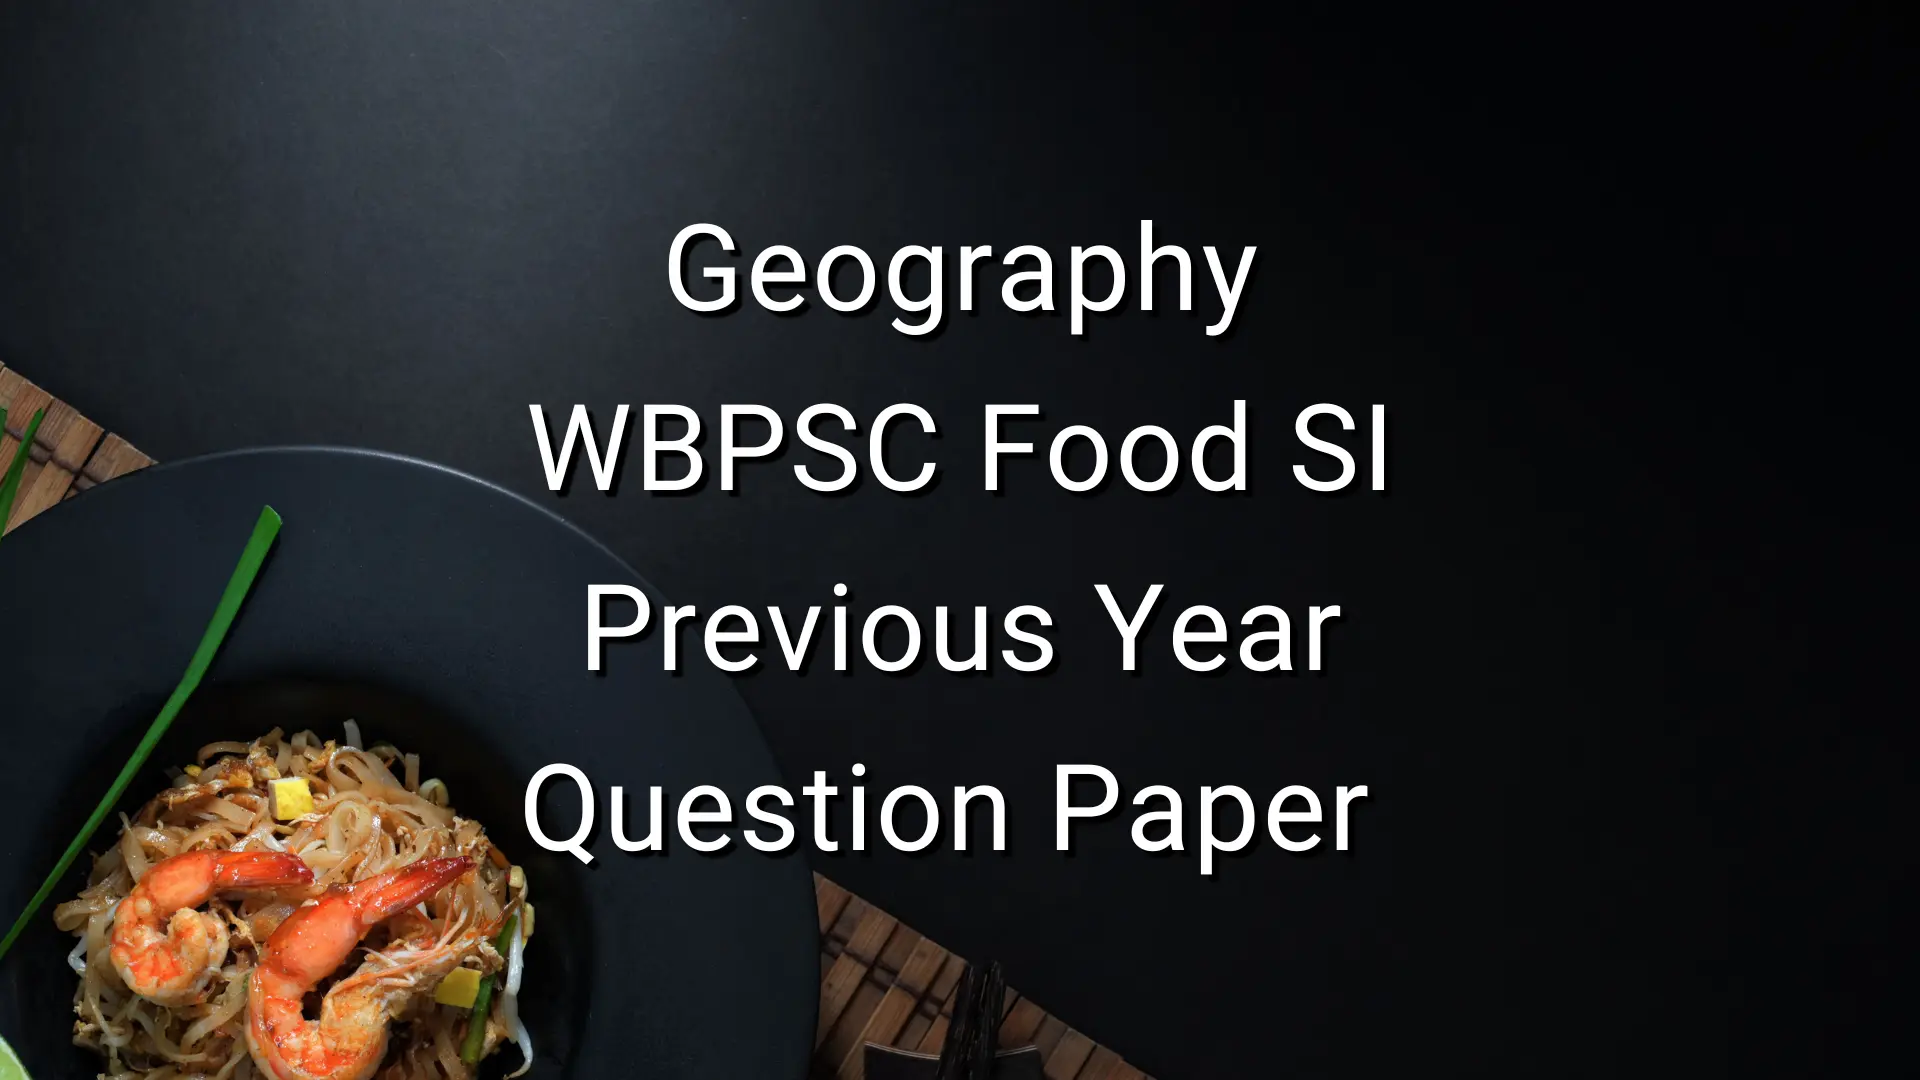 Geography WBPSC Food SI Previous Year Question Paper